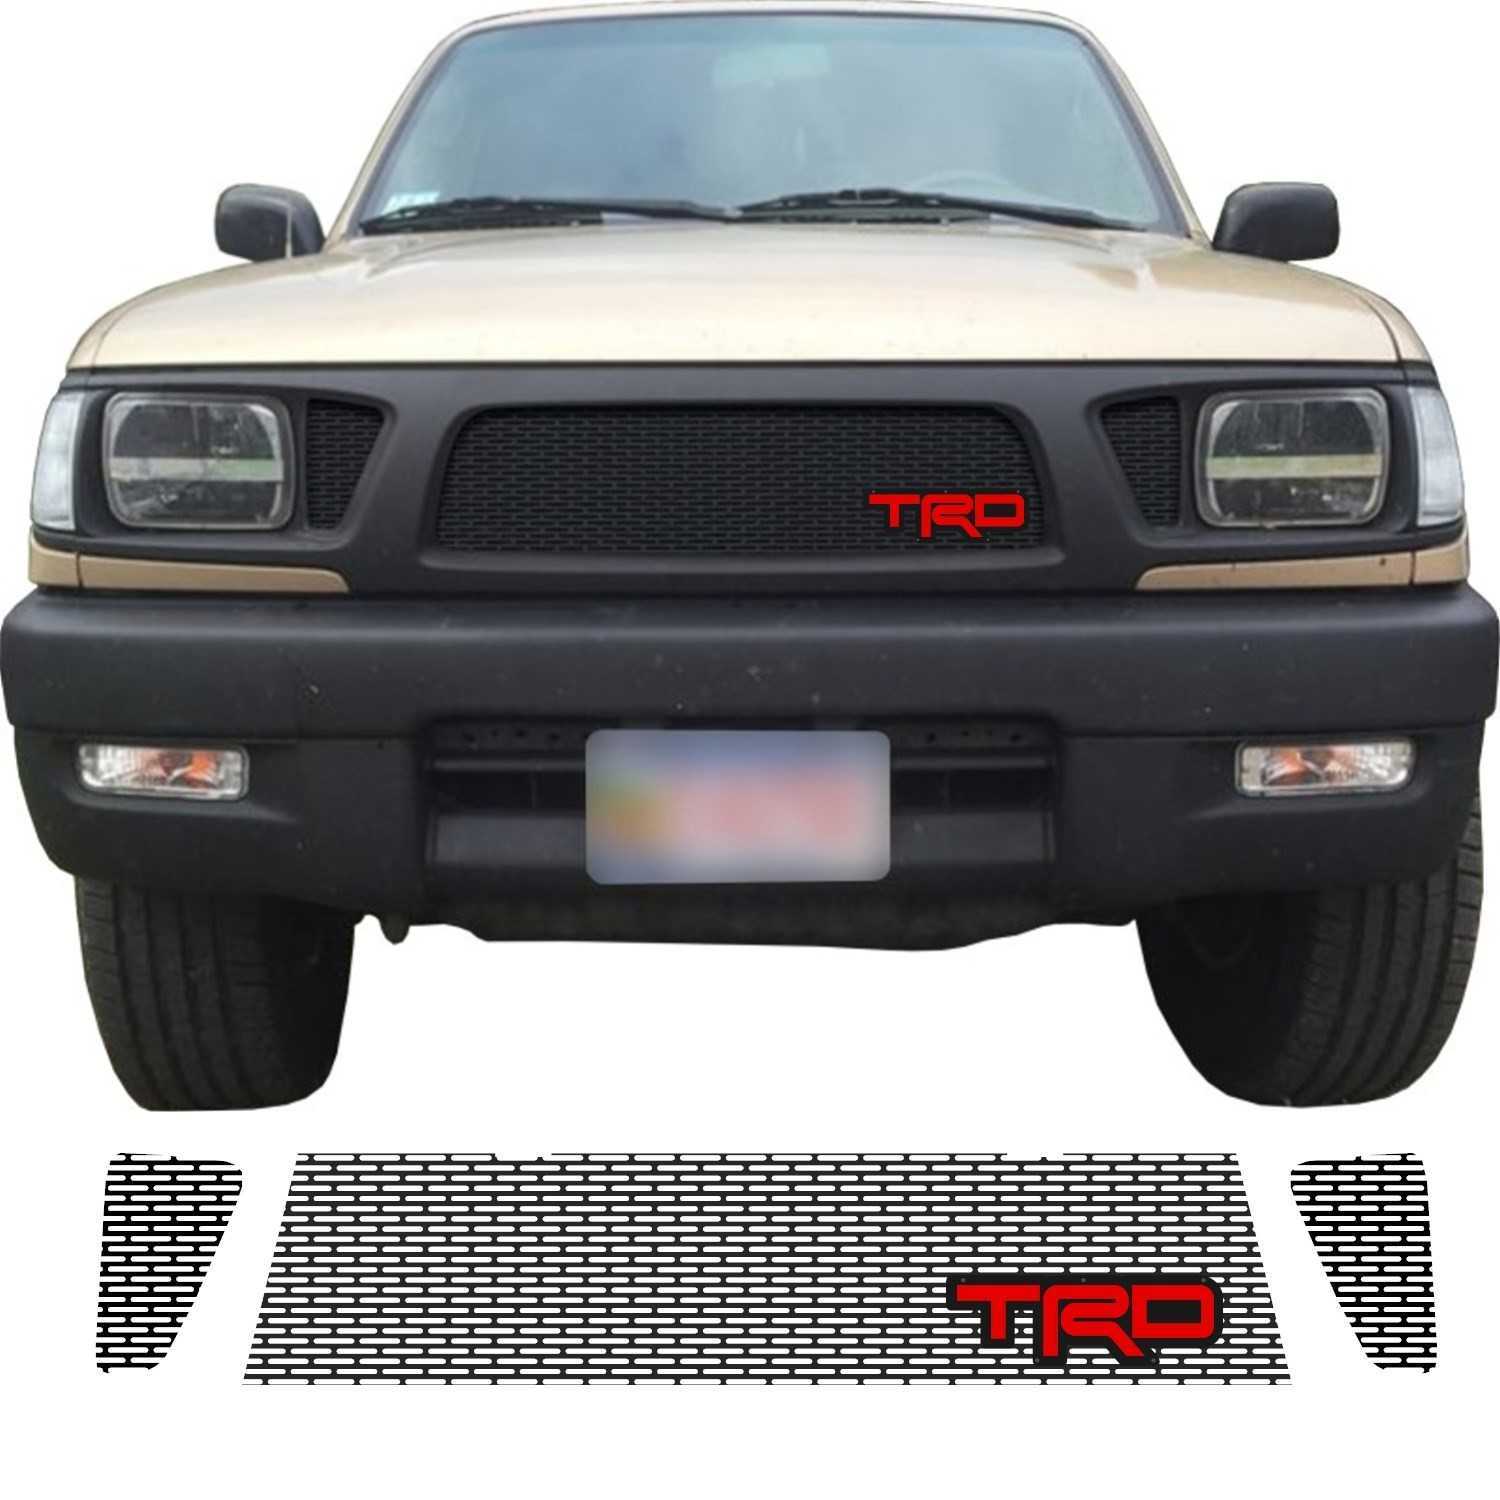 1995 - 1997 Toyota Tacoma Grill Mesh With TRD Emblem #1